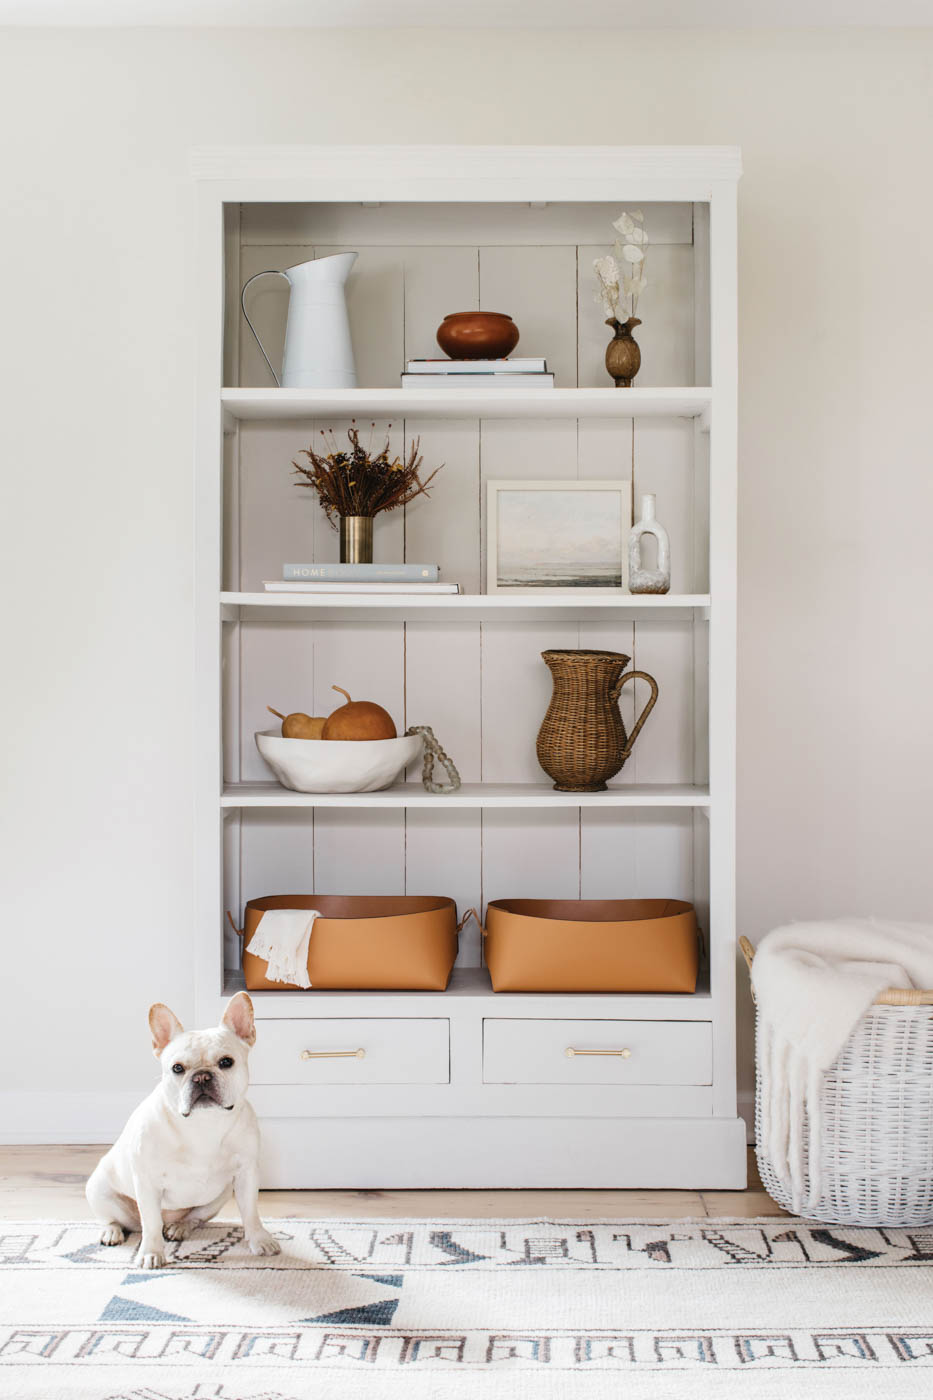 64 A Beautifully Styled Shelving Space Evokes A Sense Of Calm